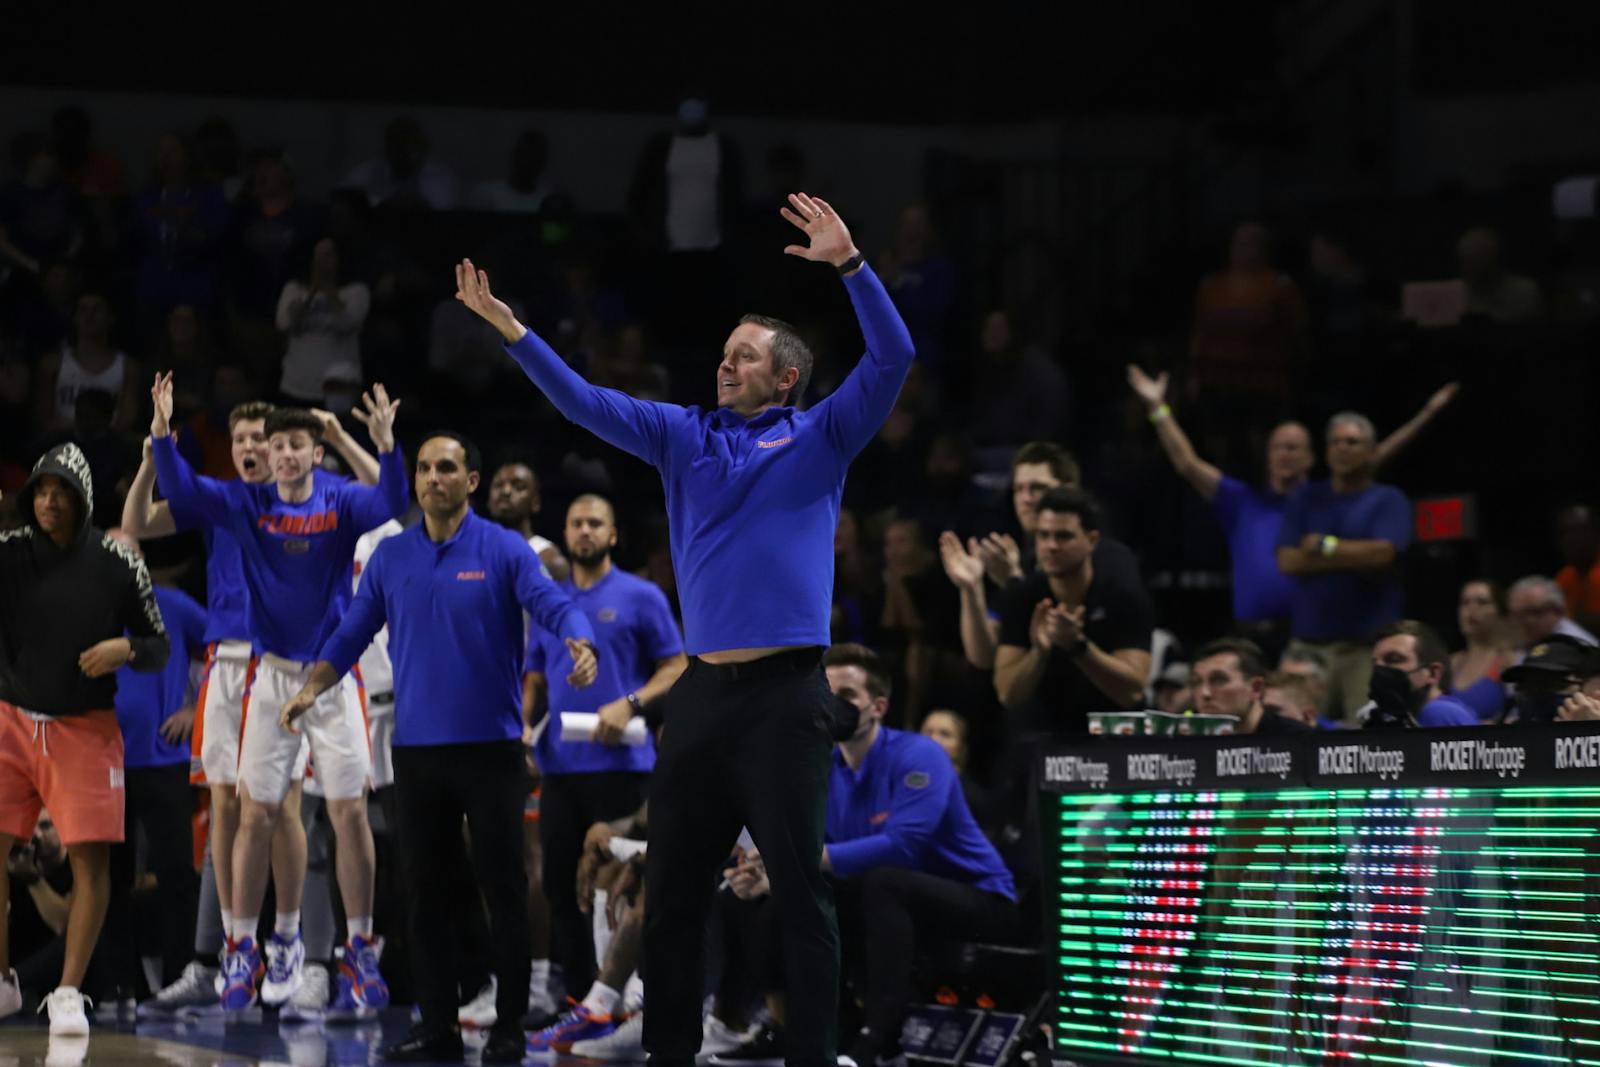 UF is still searching for its best game in the tourney